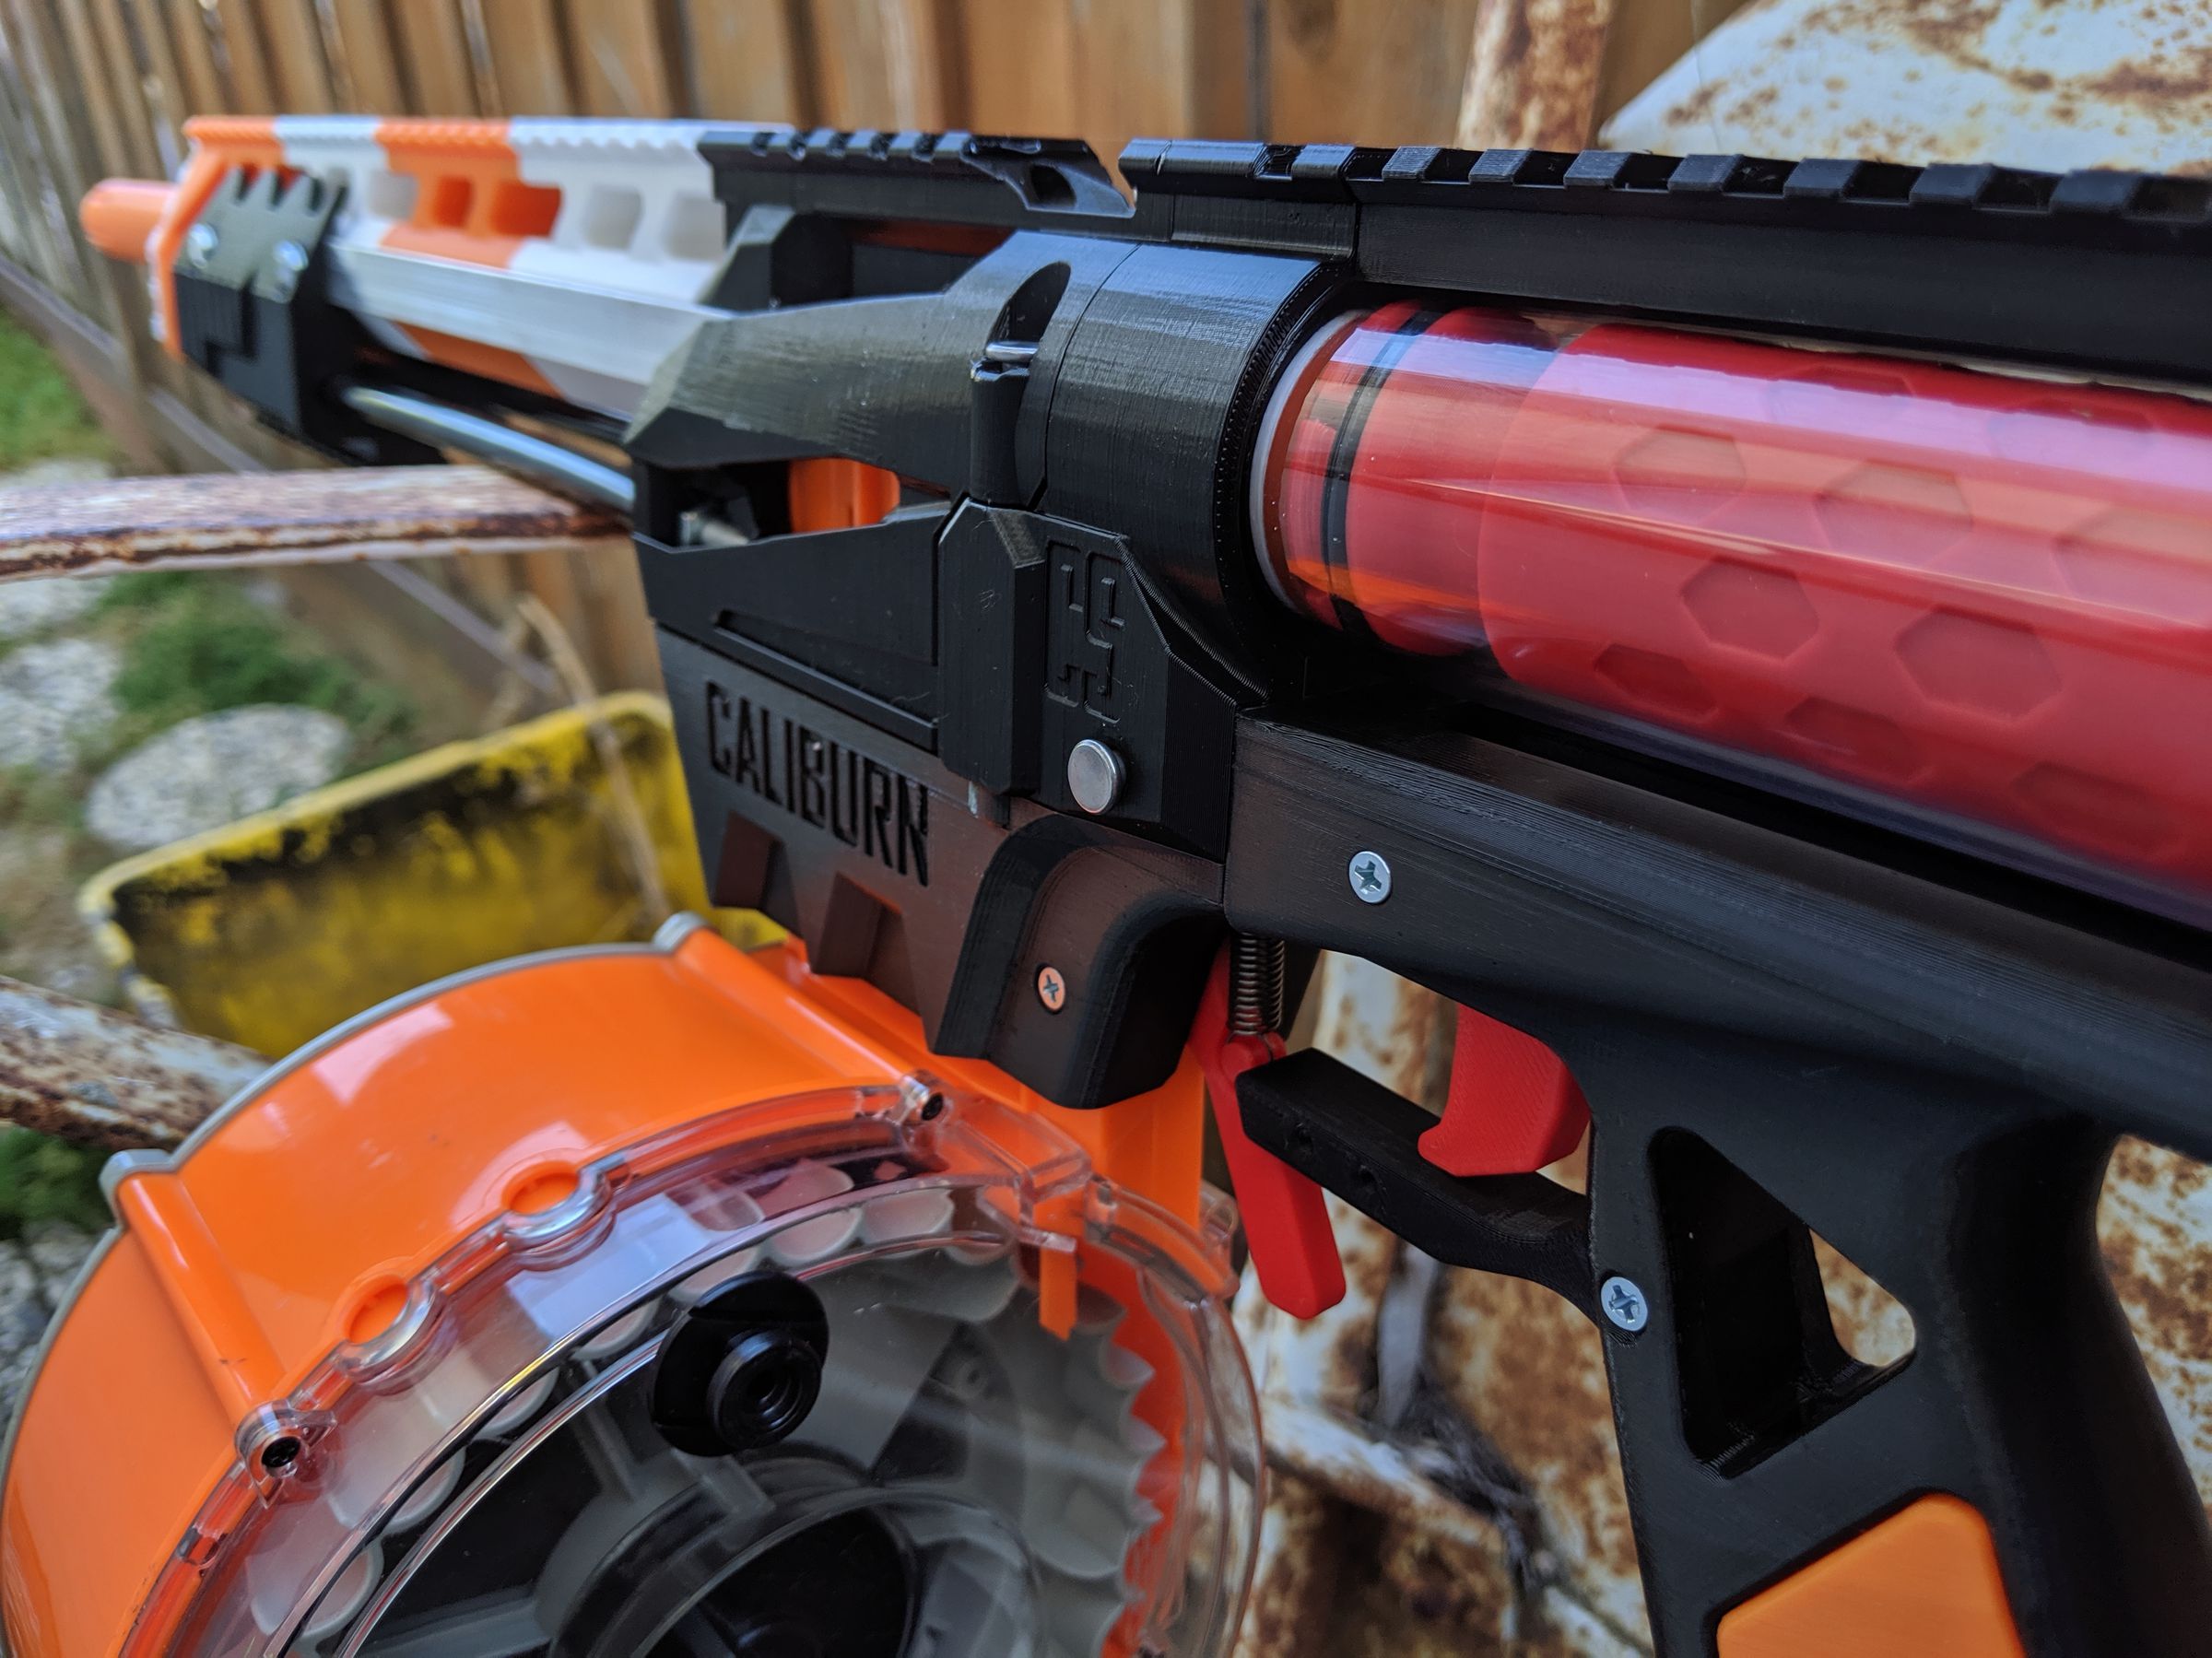 A closer look at the Caliburn blaster, a long rifle with 3D printed parts.